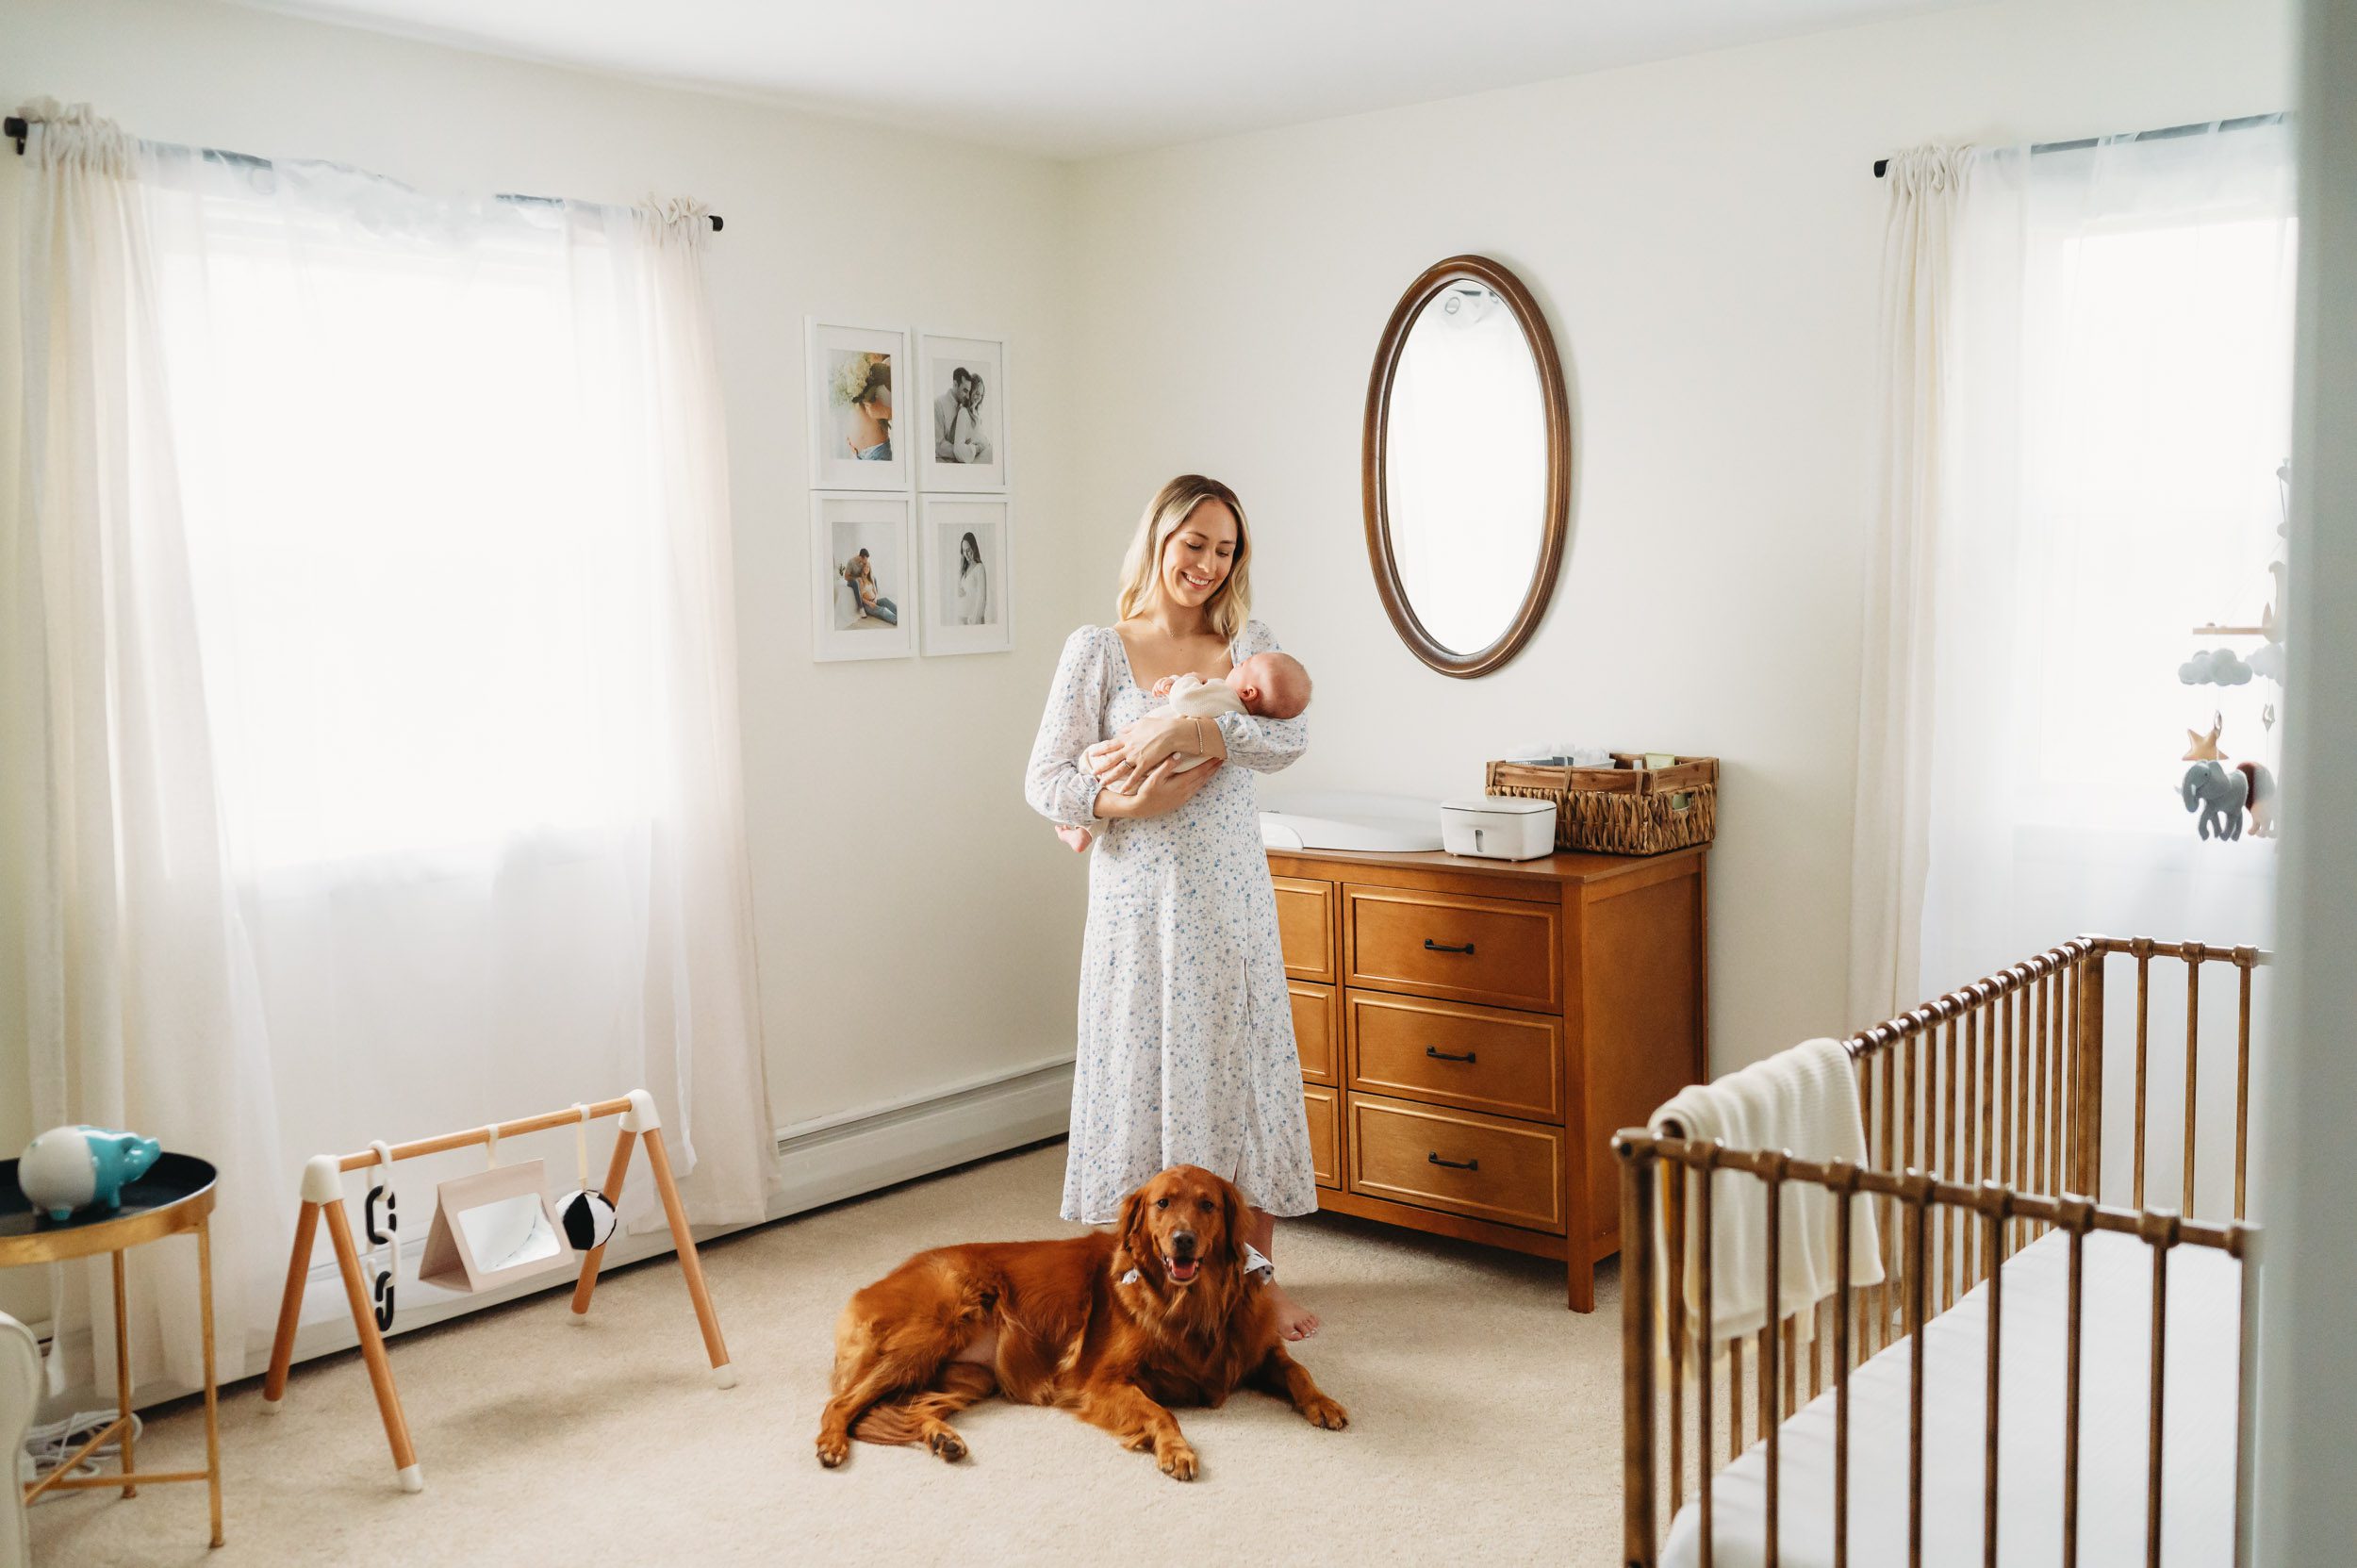 a new mother standing in her son's nursery holding her baby boy in her arms and smiling down at him while the family dog sits at her feet and looks at the camera during an in home newborn photography session